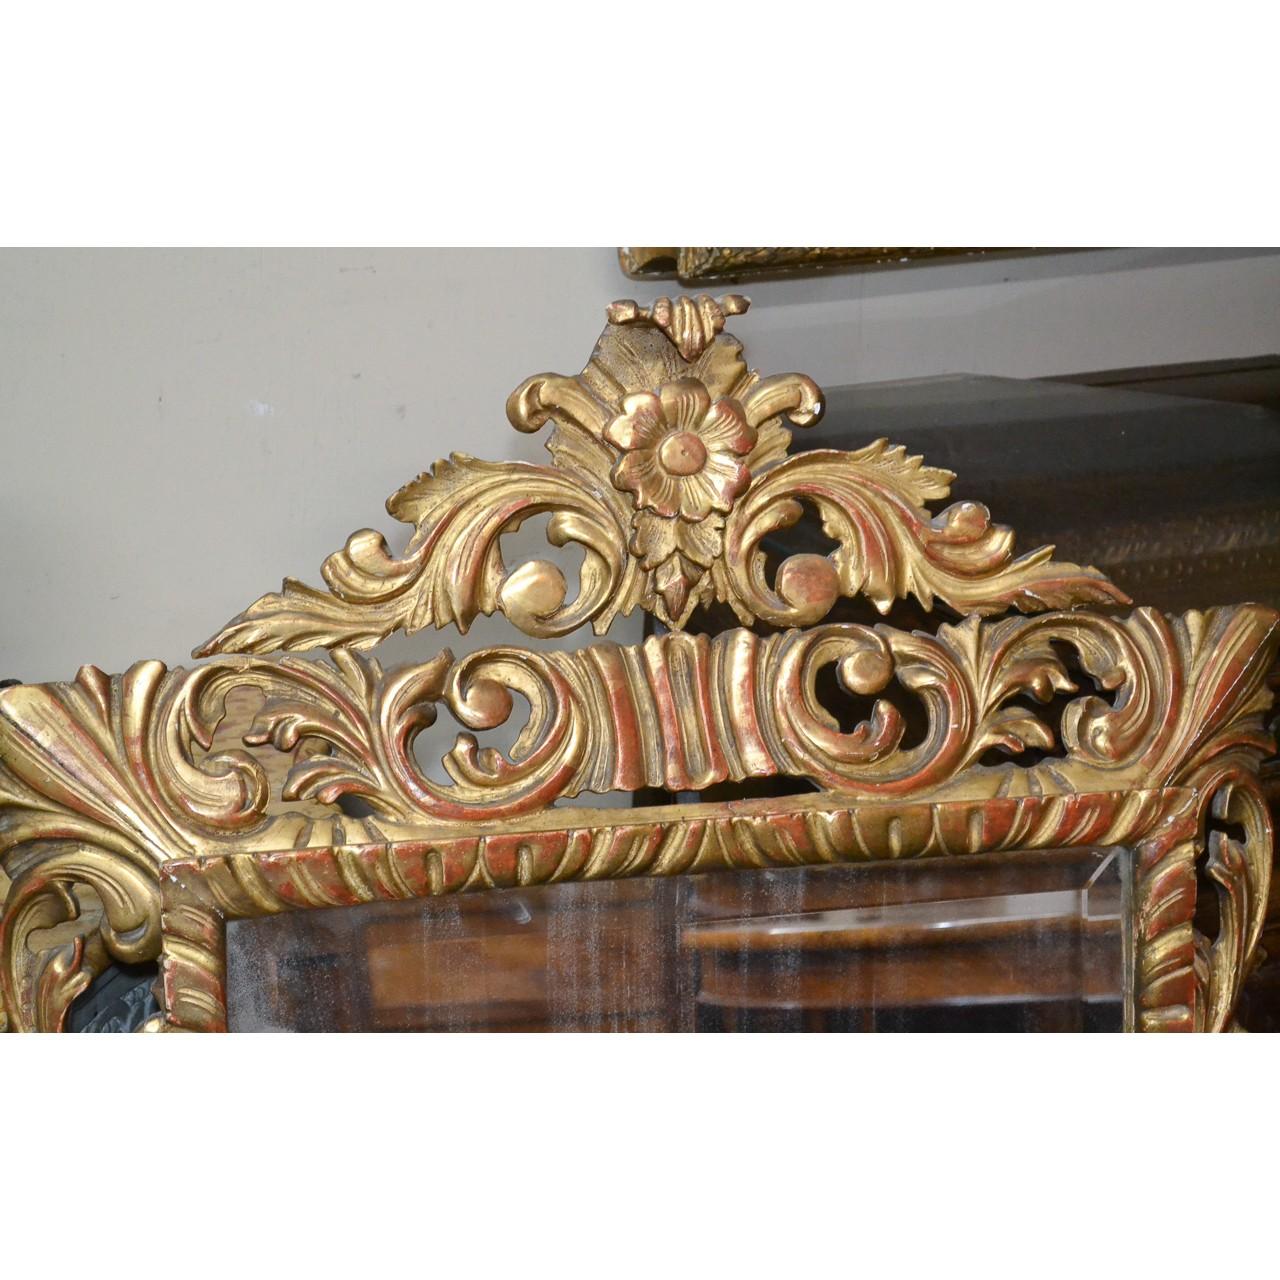 Outstanding 19th century French giltwood wall or console mirror. The finely carved gold-gilded frame with reddish highlights and ornately decorated with flower heads and scrolling acanthus leaves. Retains the original bevelled mirror,

circa 1880.